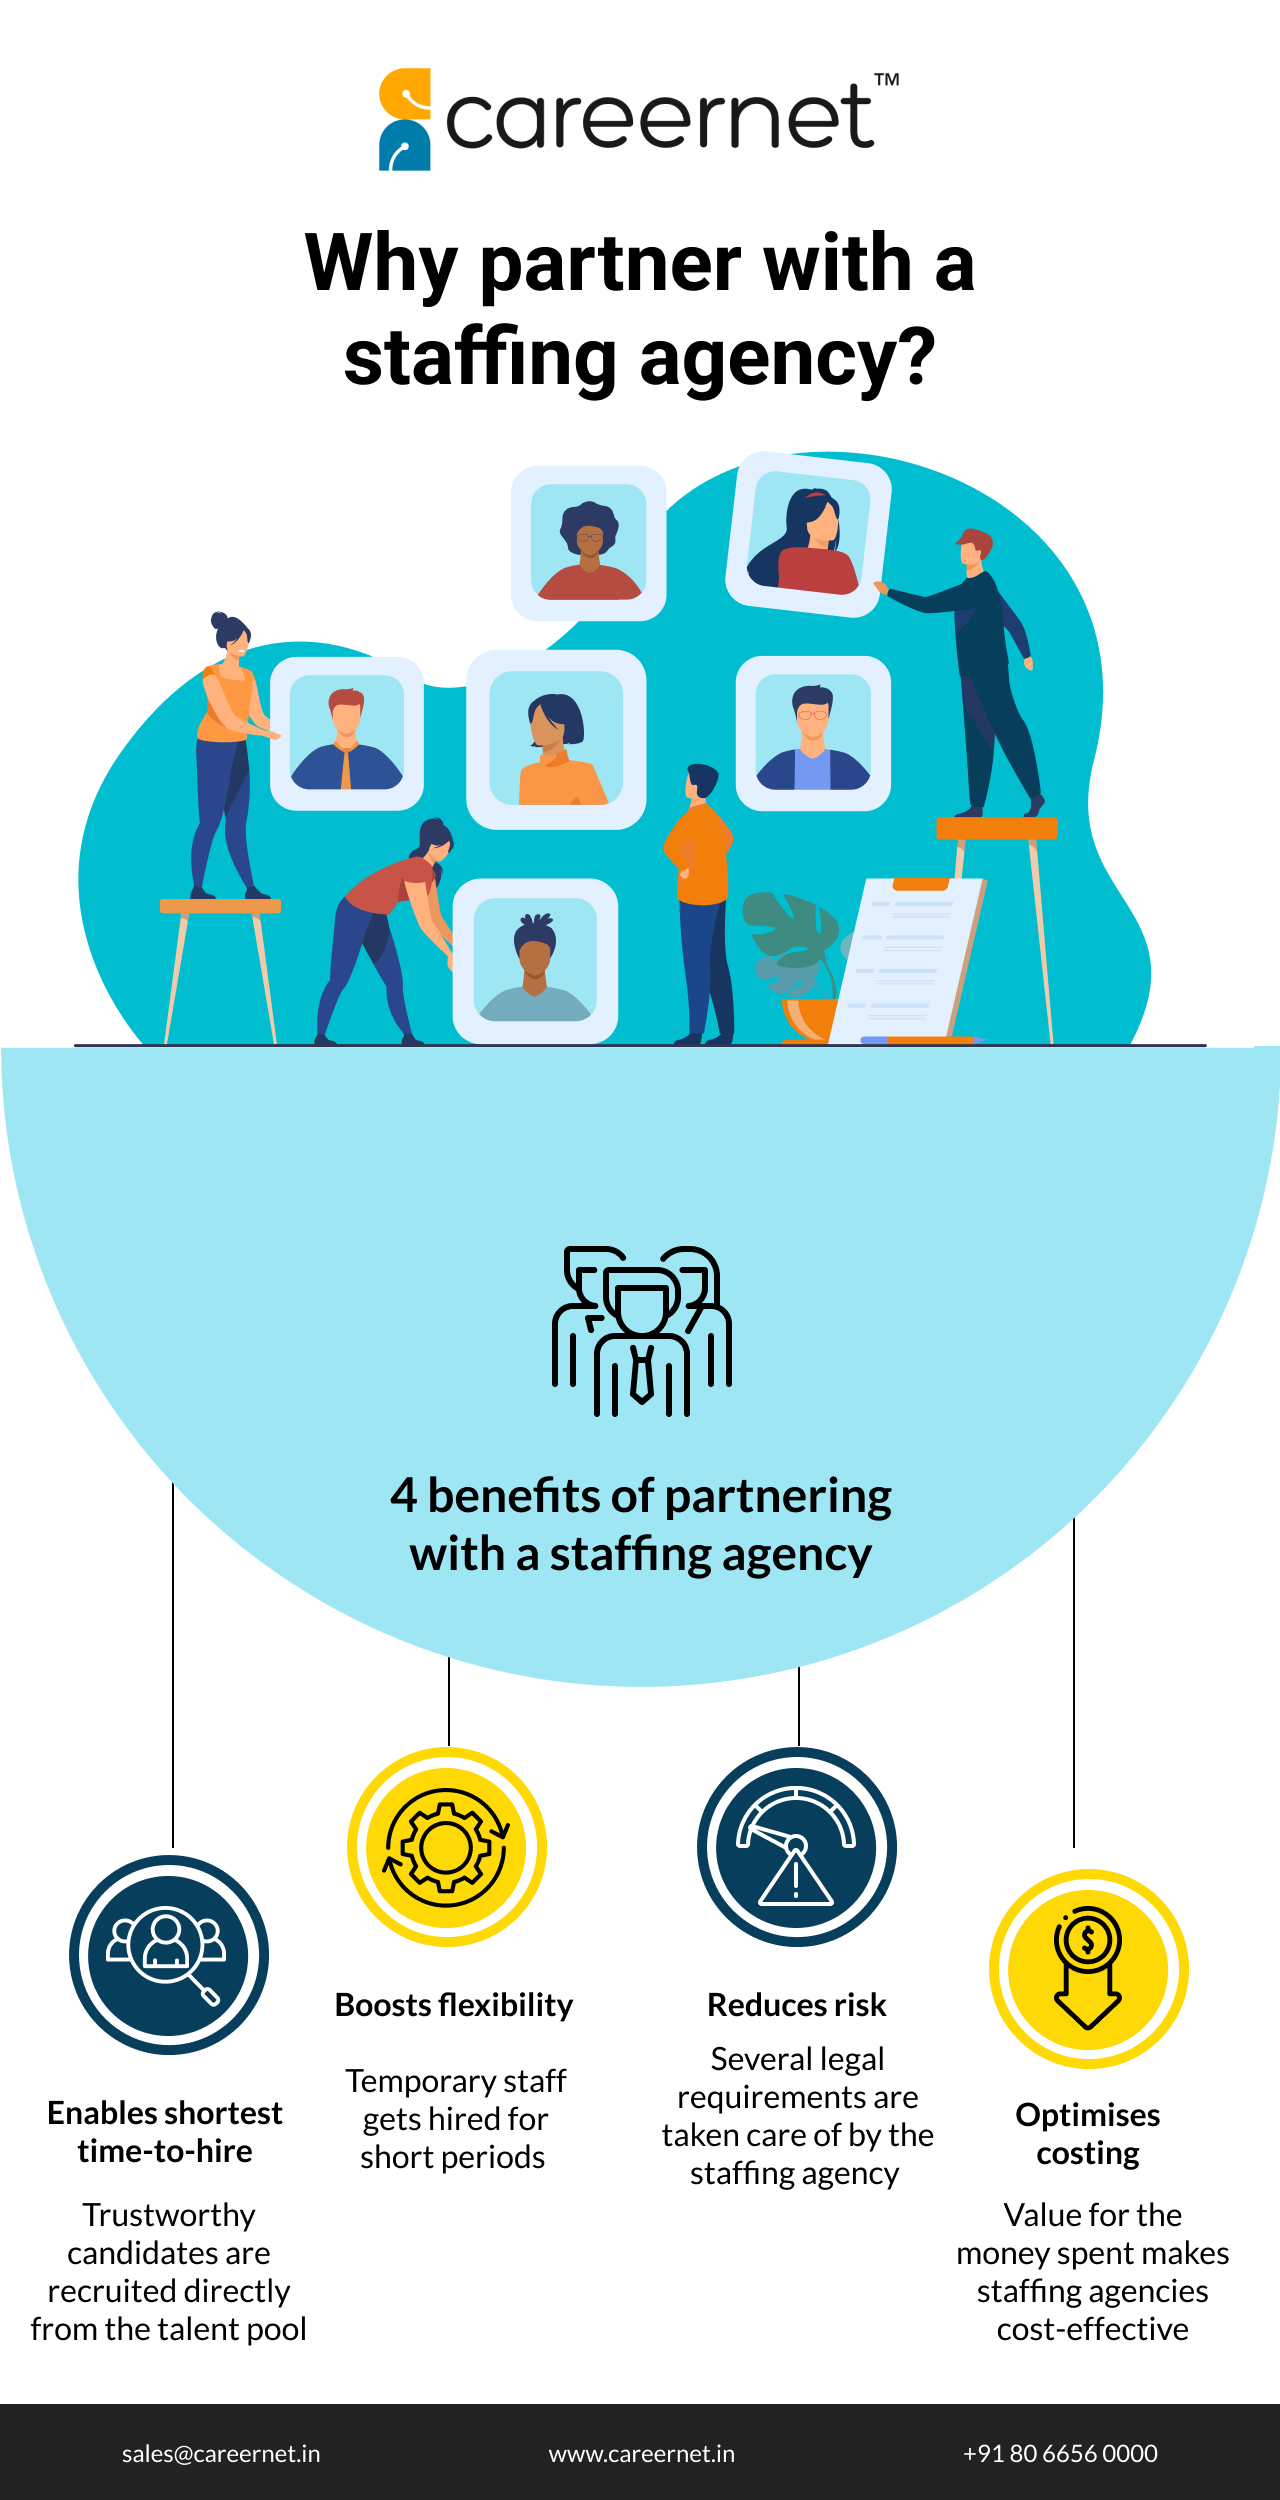 Why partner with a staffing agency?